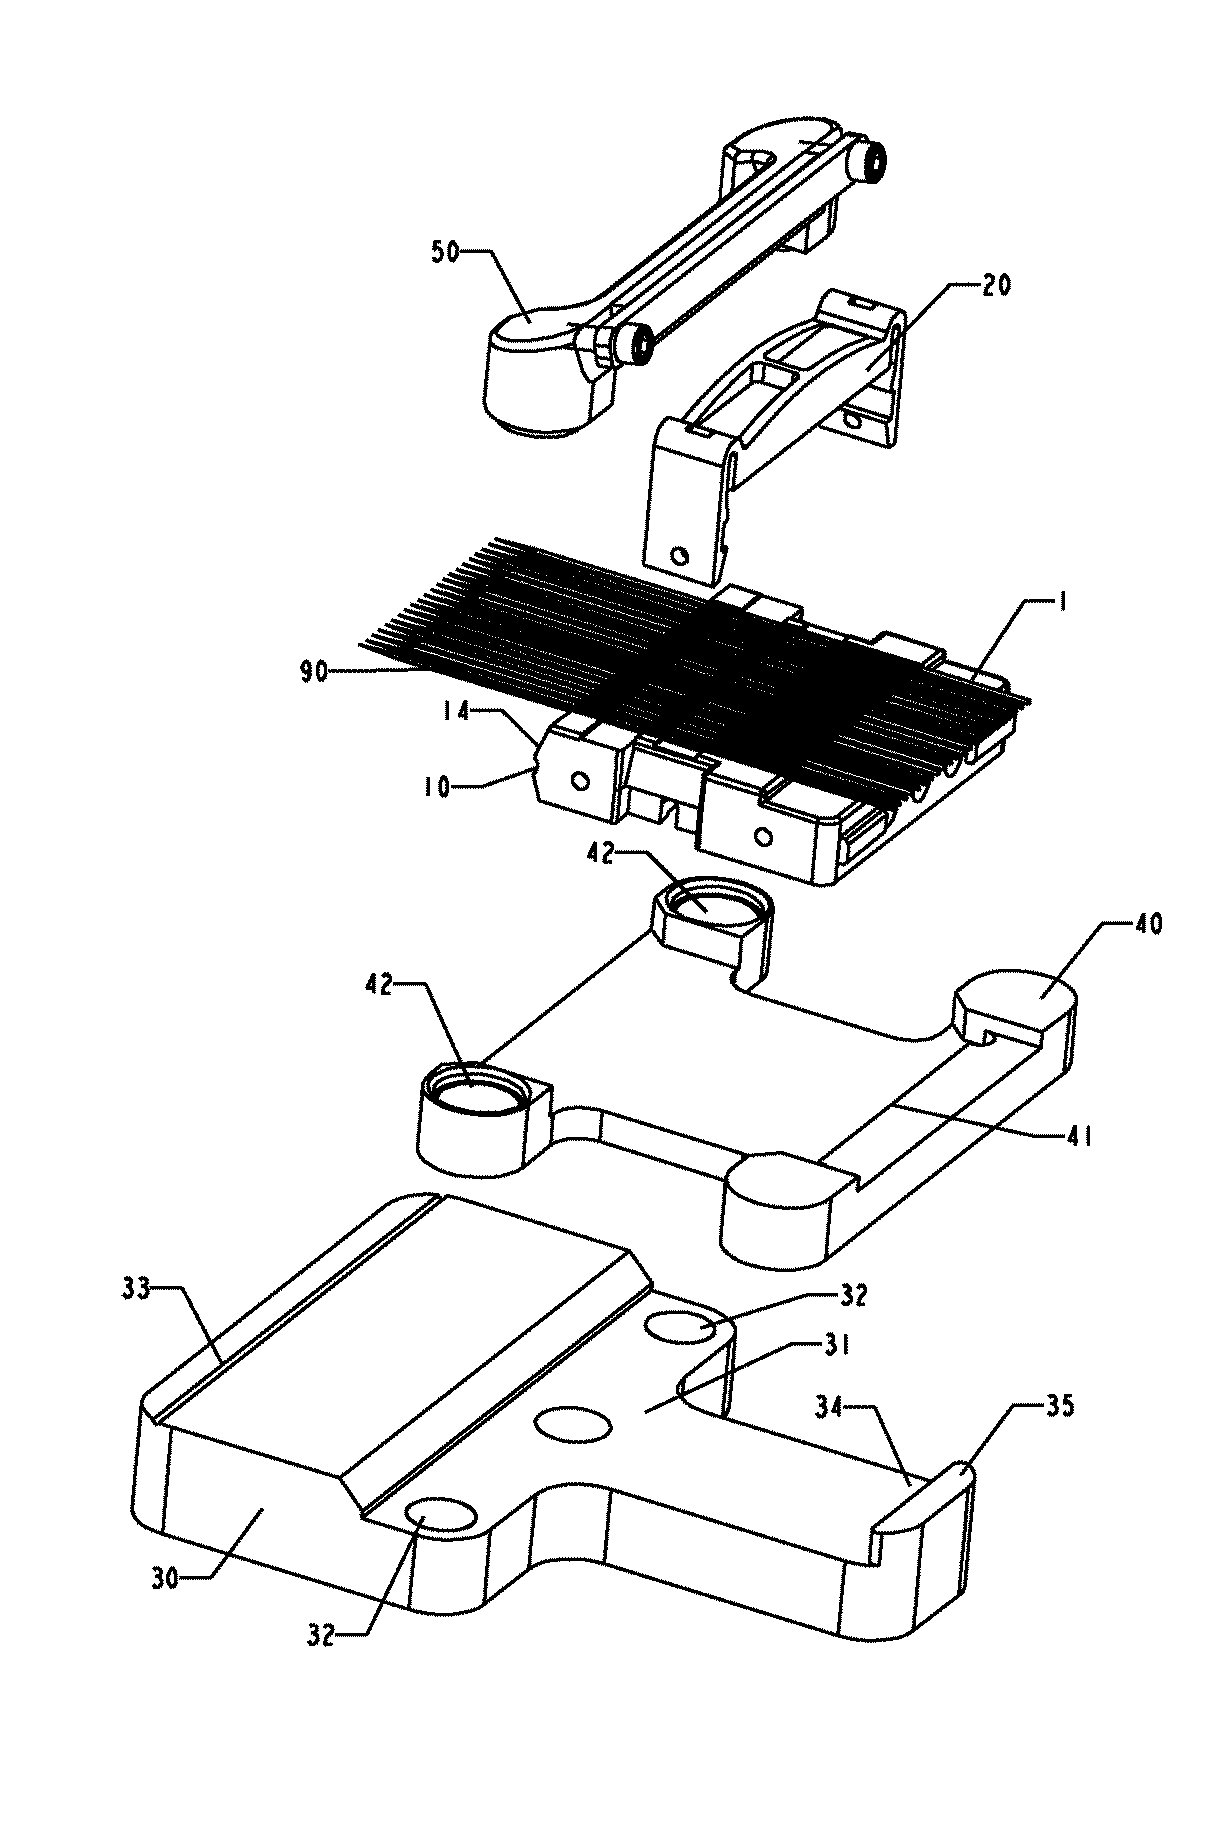 Packaging, shipping and storage device for capillary tubes